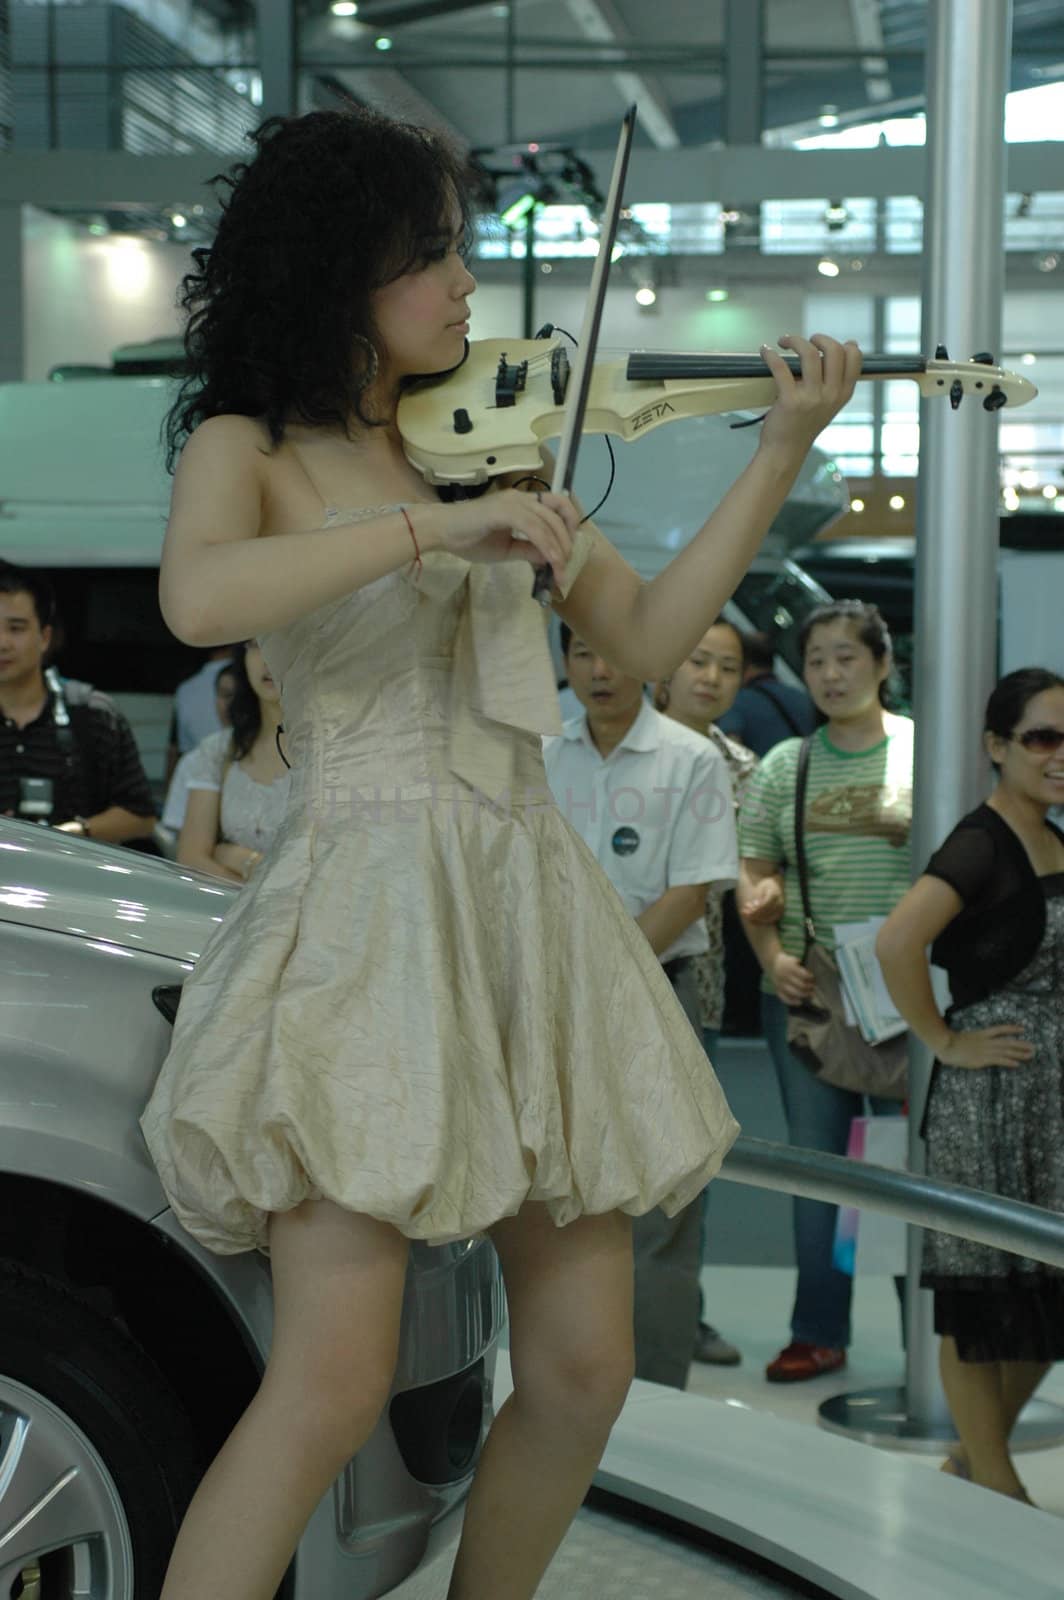 Chinese model. Girls promoting modern cars during Shenzhen Moto - car show in China.